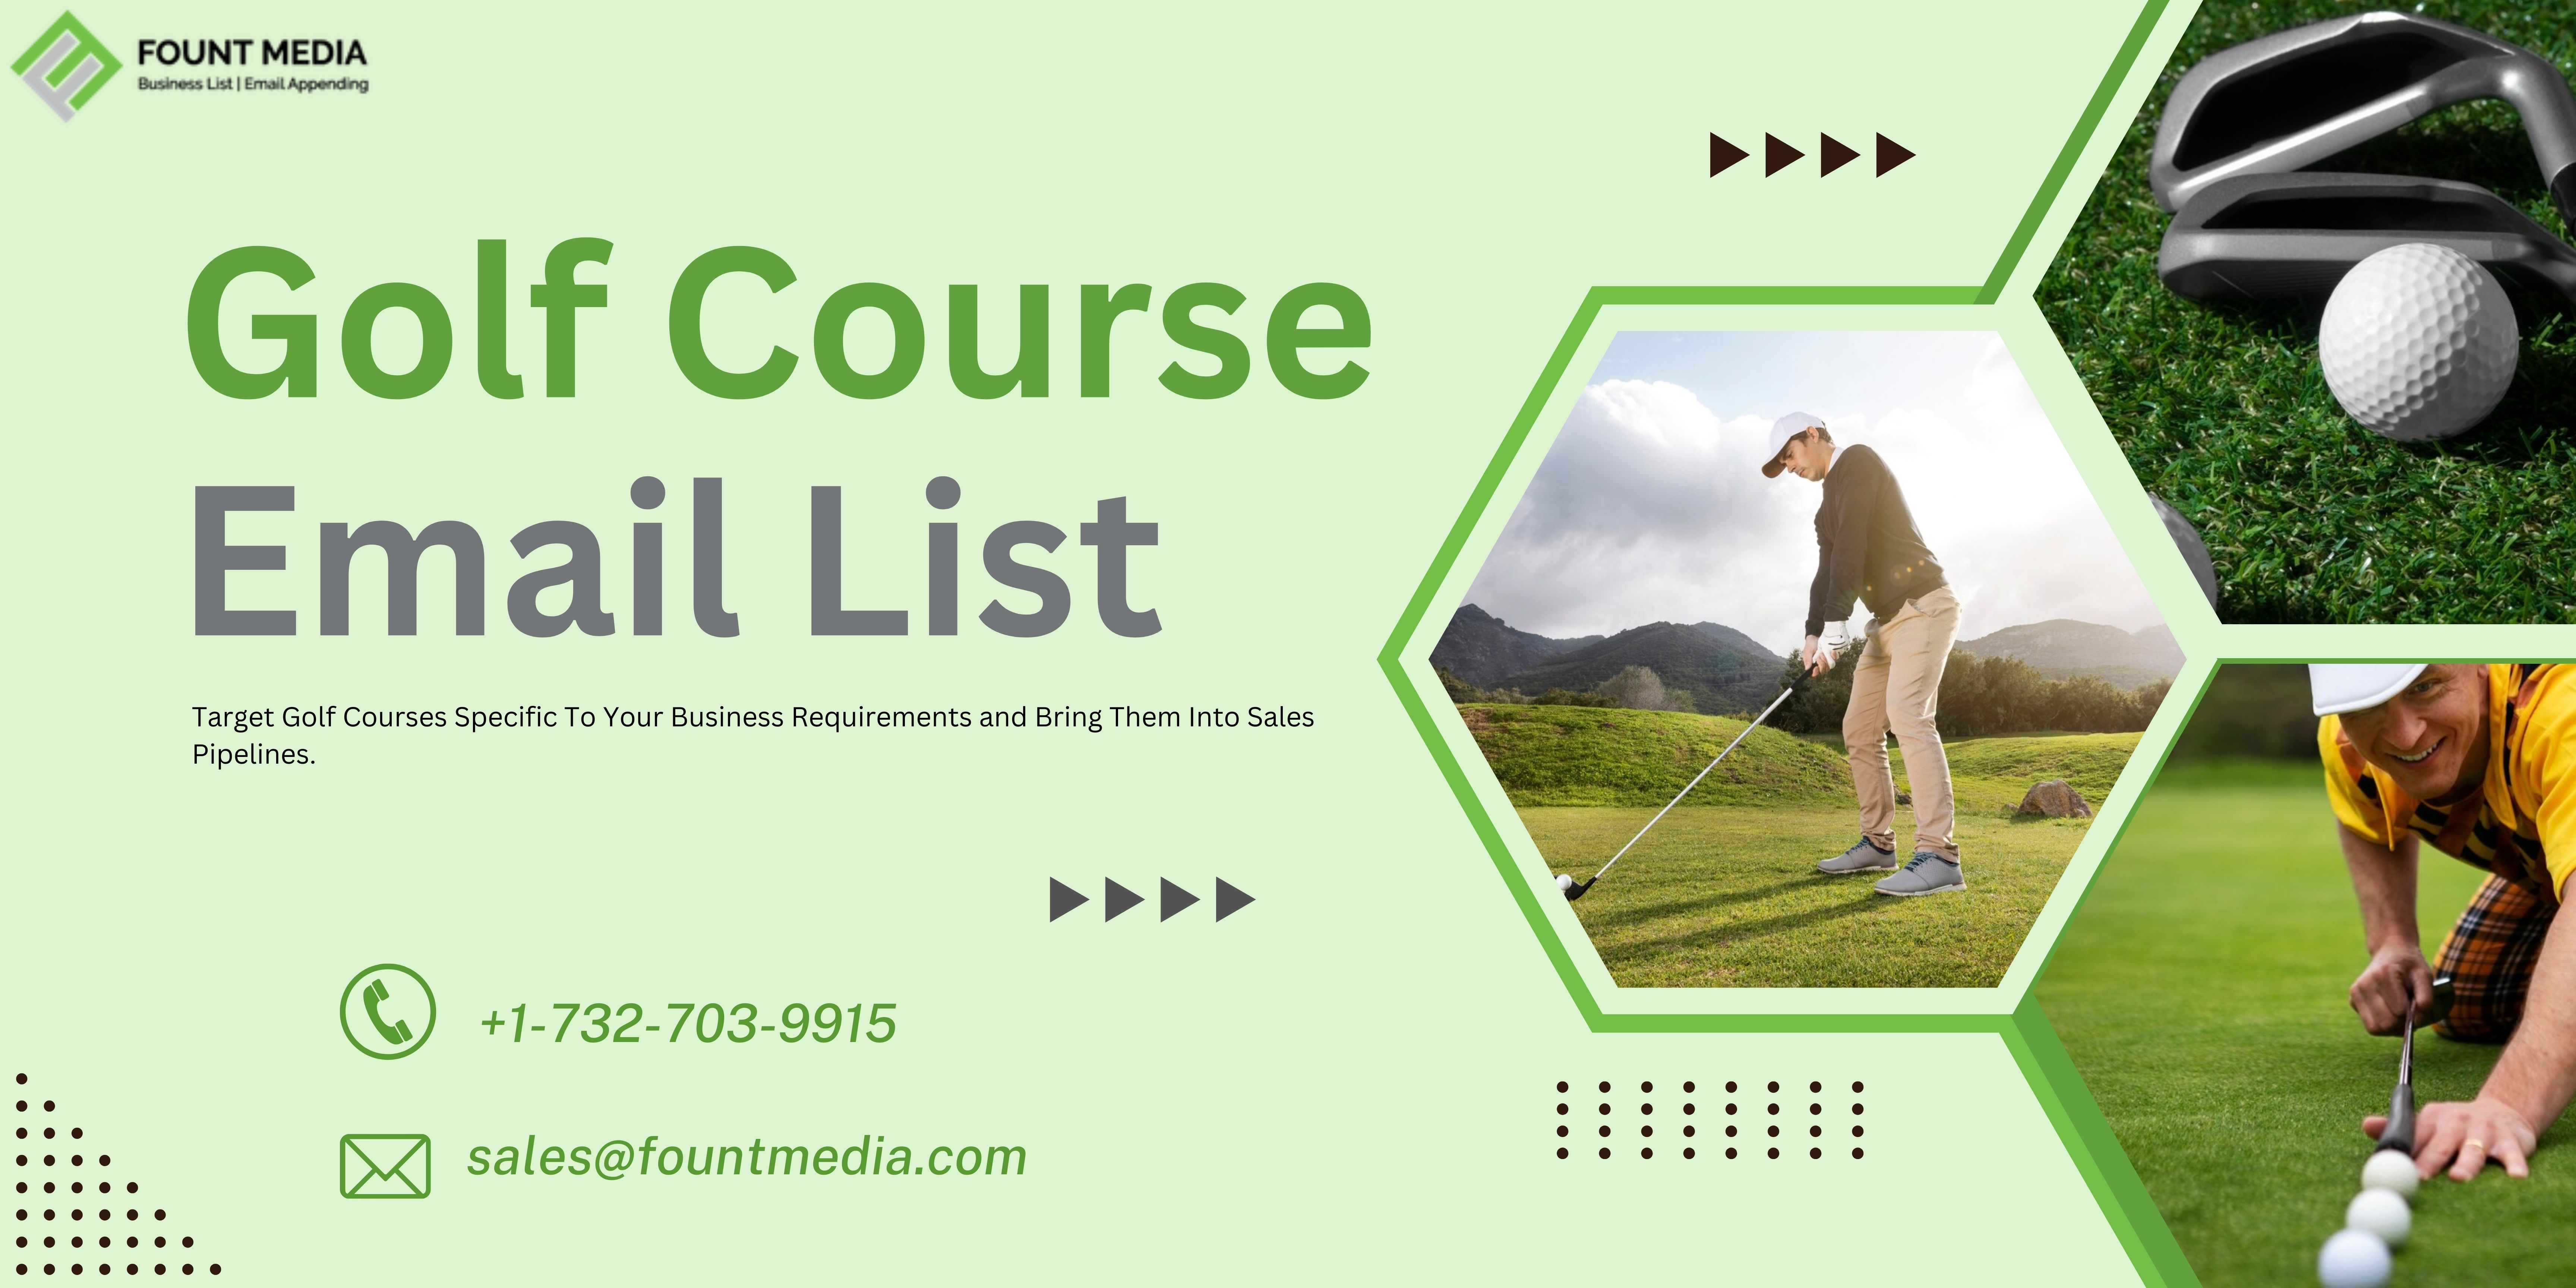 Verified Golf Course Email List | Golf Course Mailing List in USA